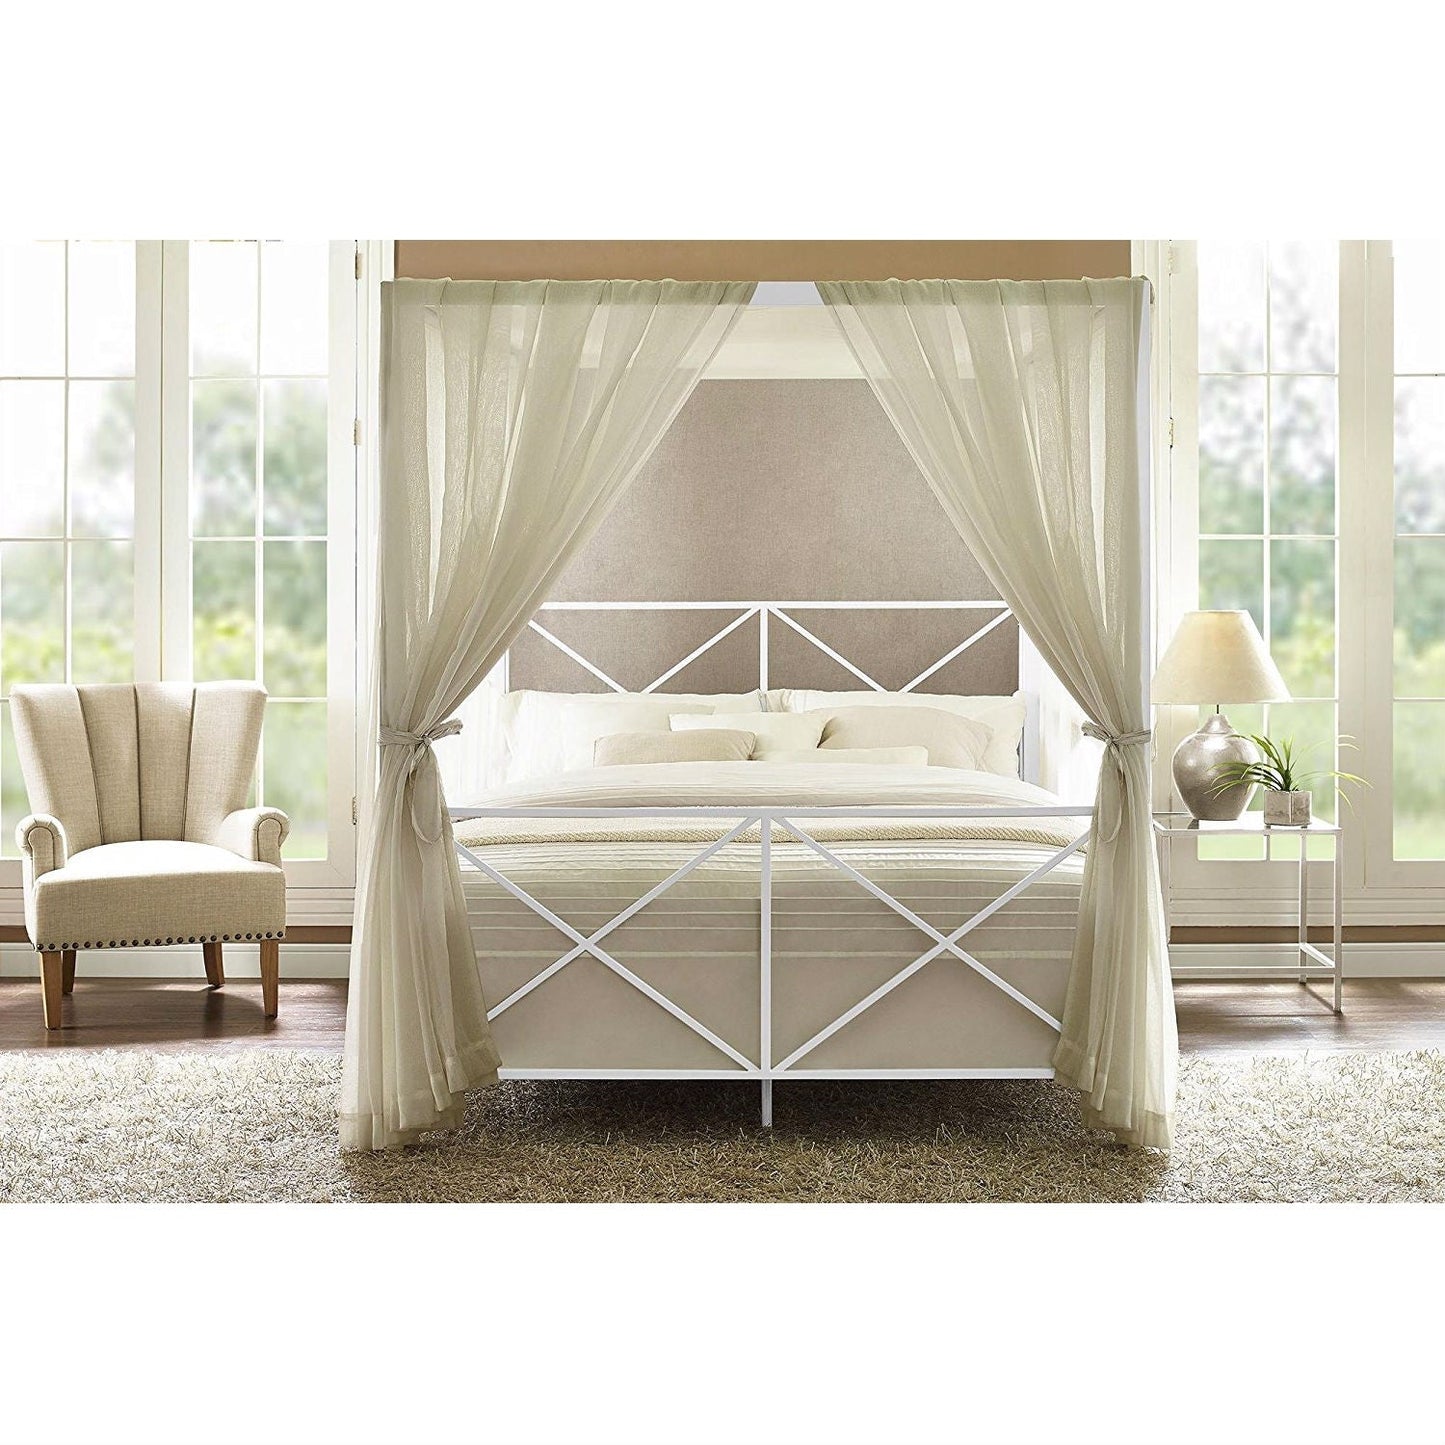 Bedroom > Bed Frames > Canopy Beds - Queen Size Sturdy Metal Canopy Bed Frame In White